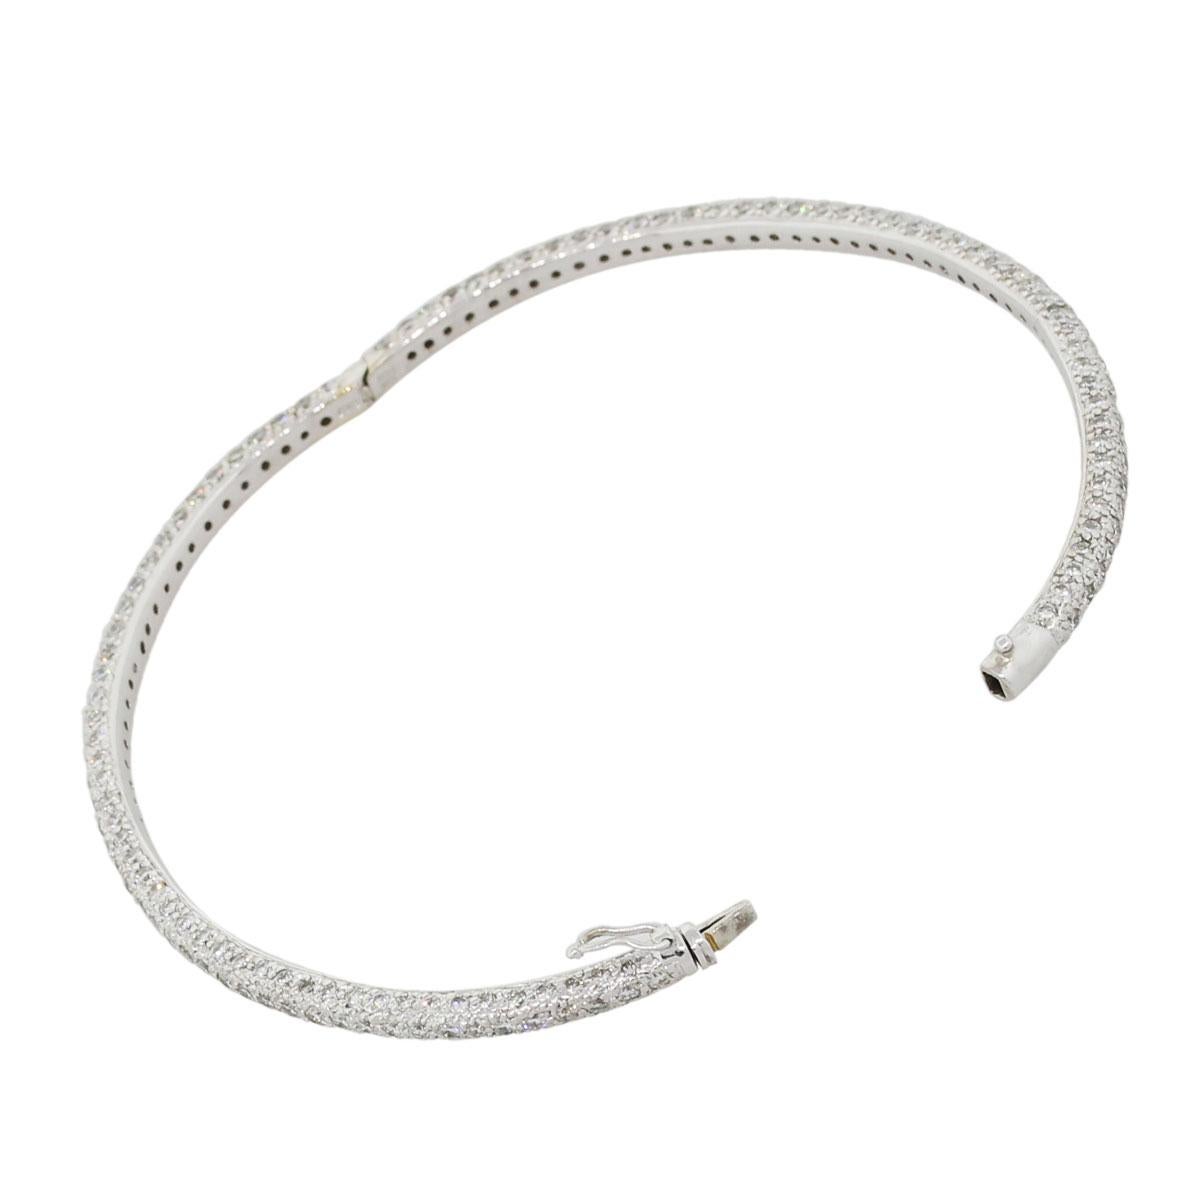 Material: 18k white gold
Diamond Details: Approximately 4.58ctw of round diamonds.
Total Weight: 11.4g (7.3dwt)
Bracelet Measurements: Will fit up to a 7″ wrist
Clasp Details: Tongue in box clasp with safety
Additional Details: Item comes complete